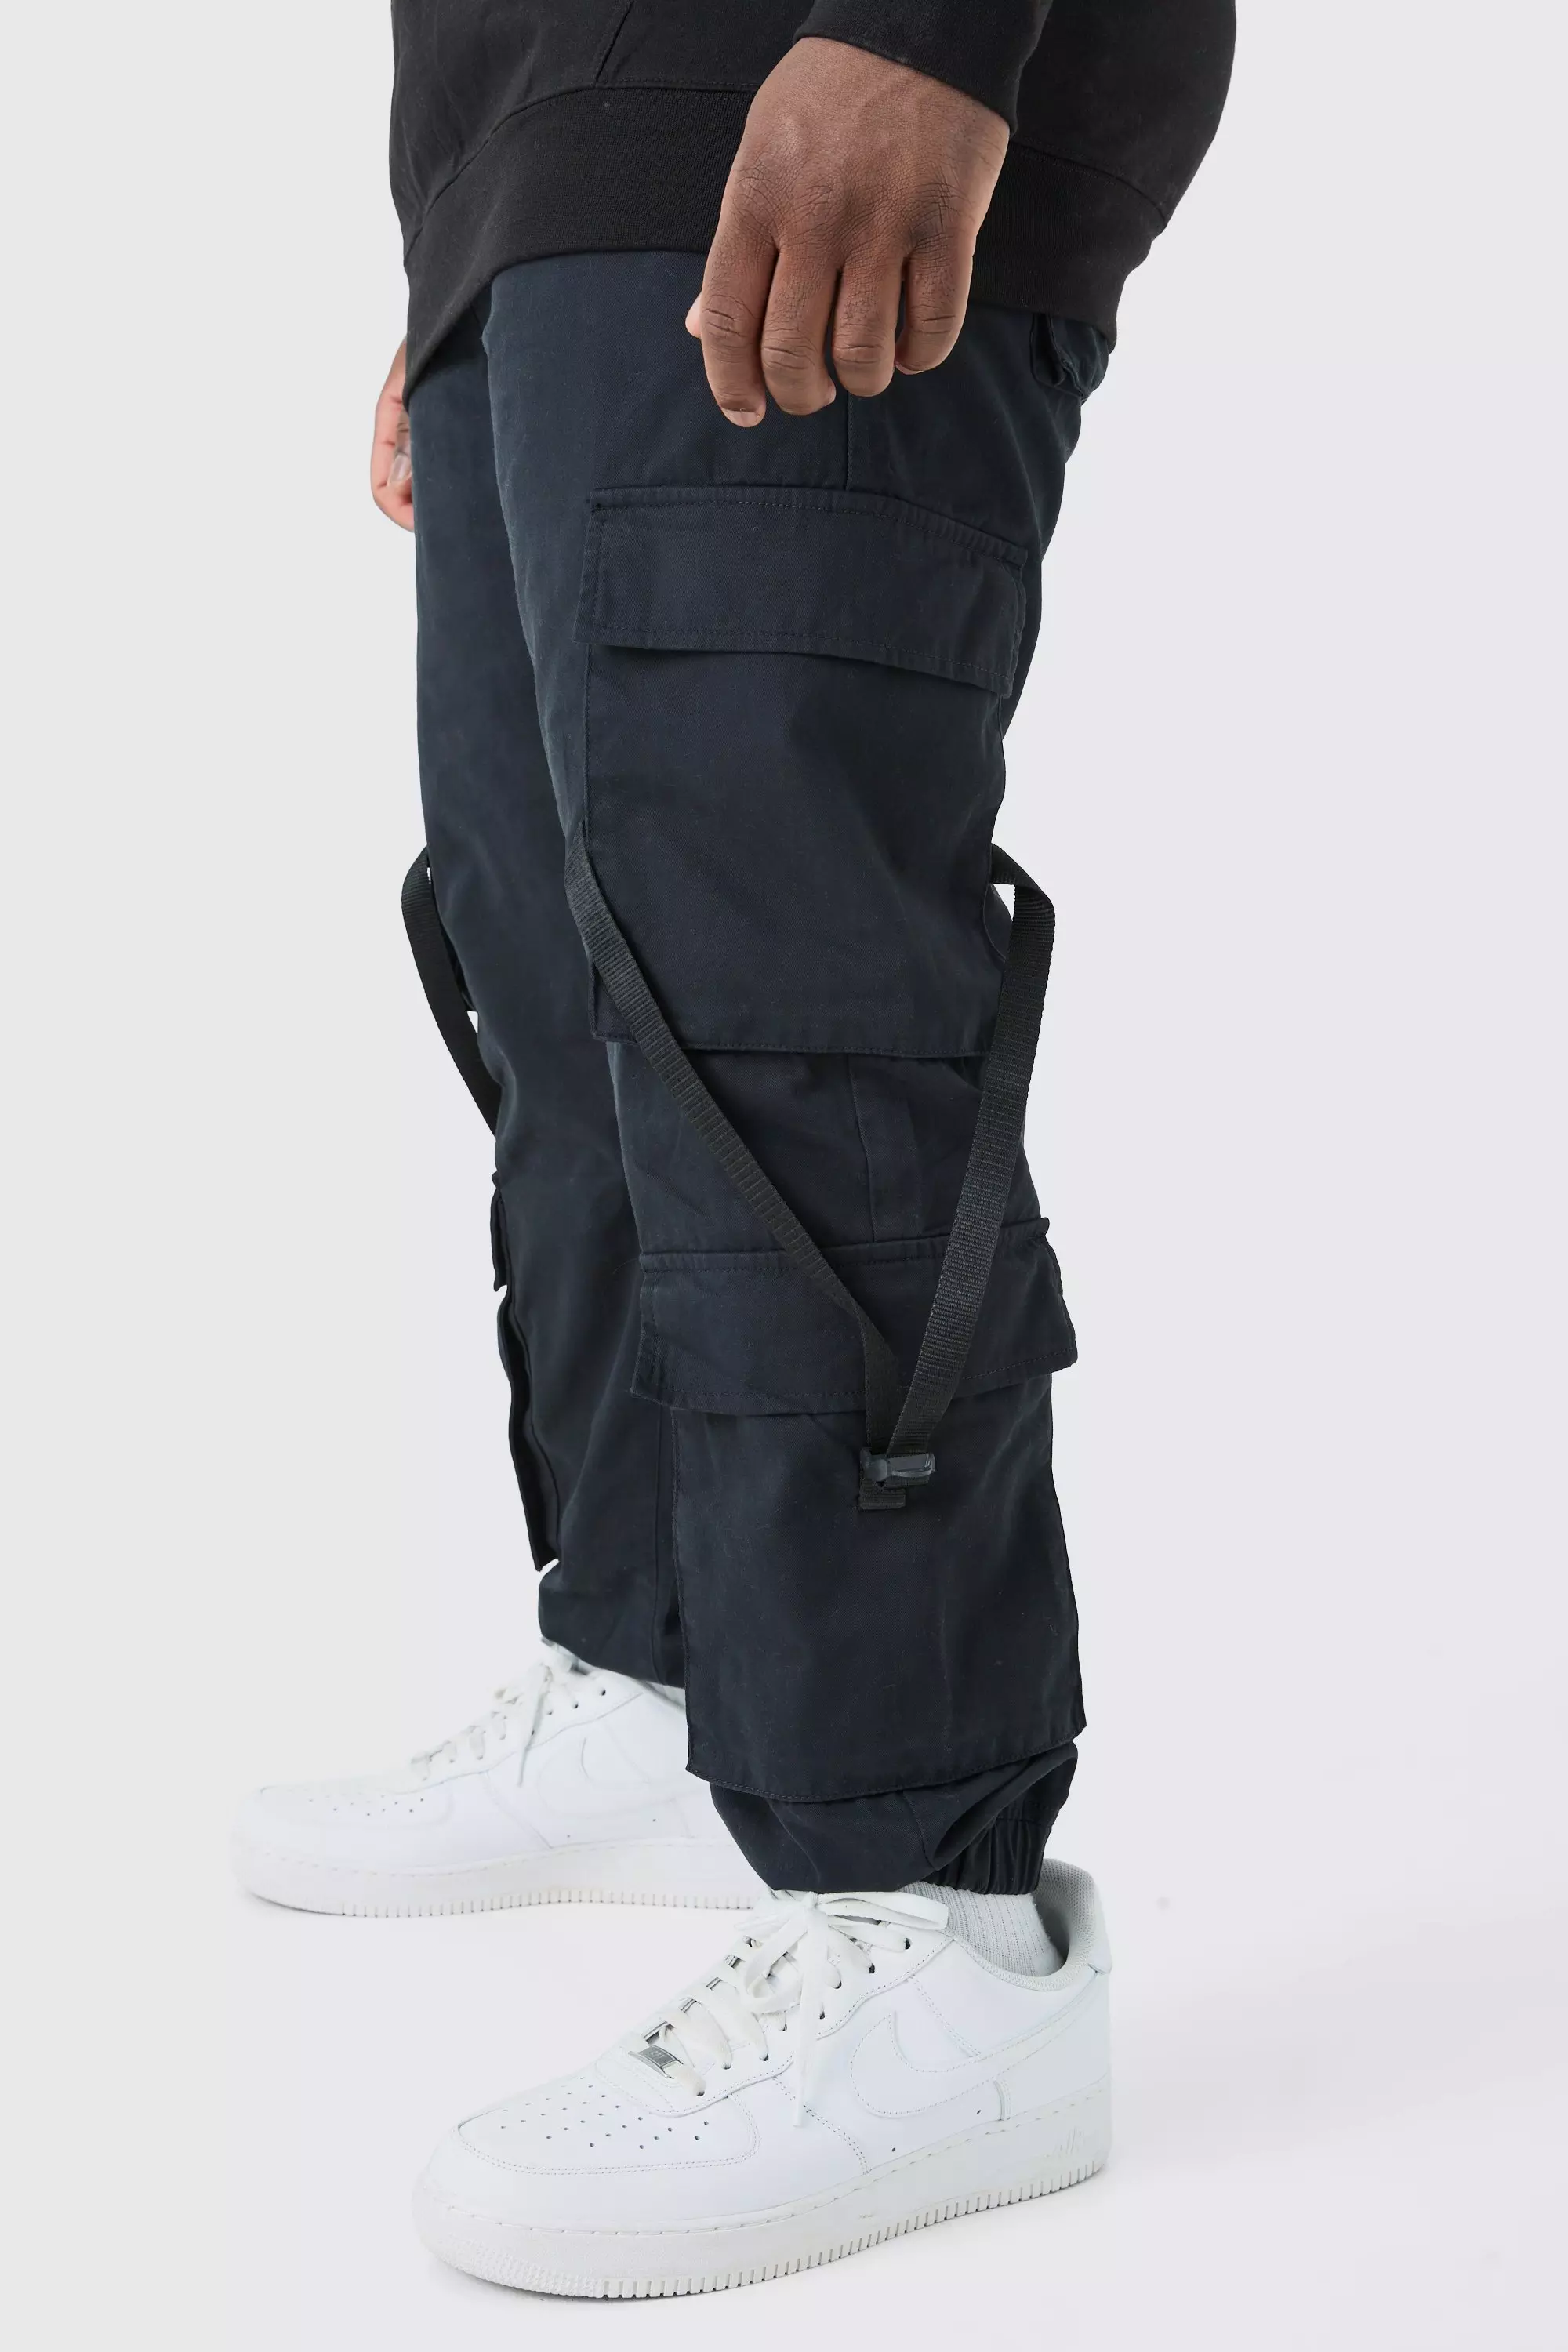 Black Cargo Pants With Straps